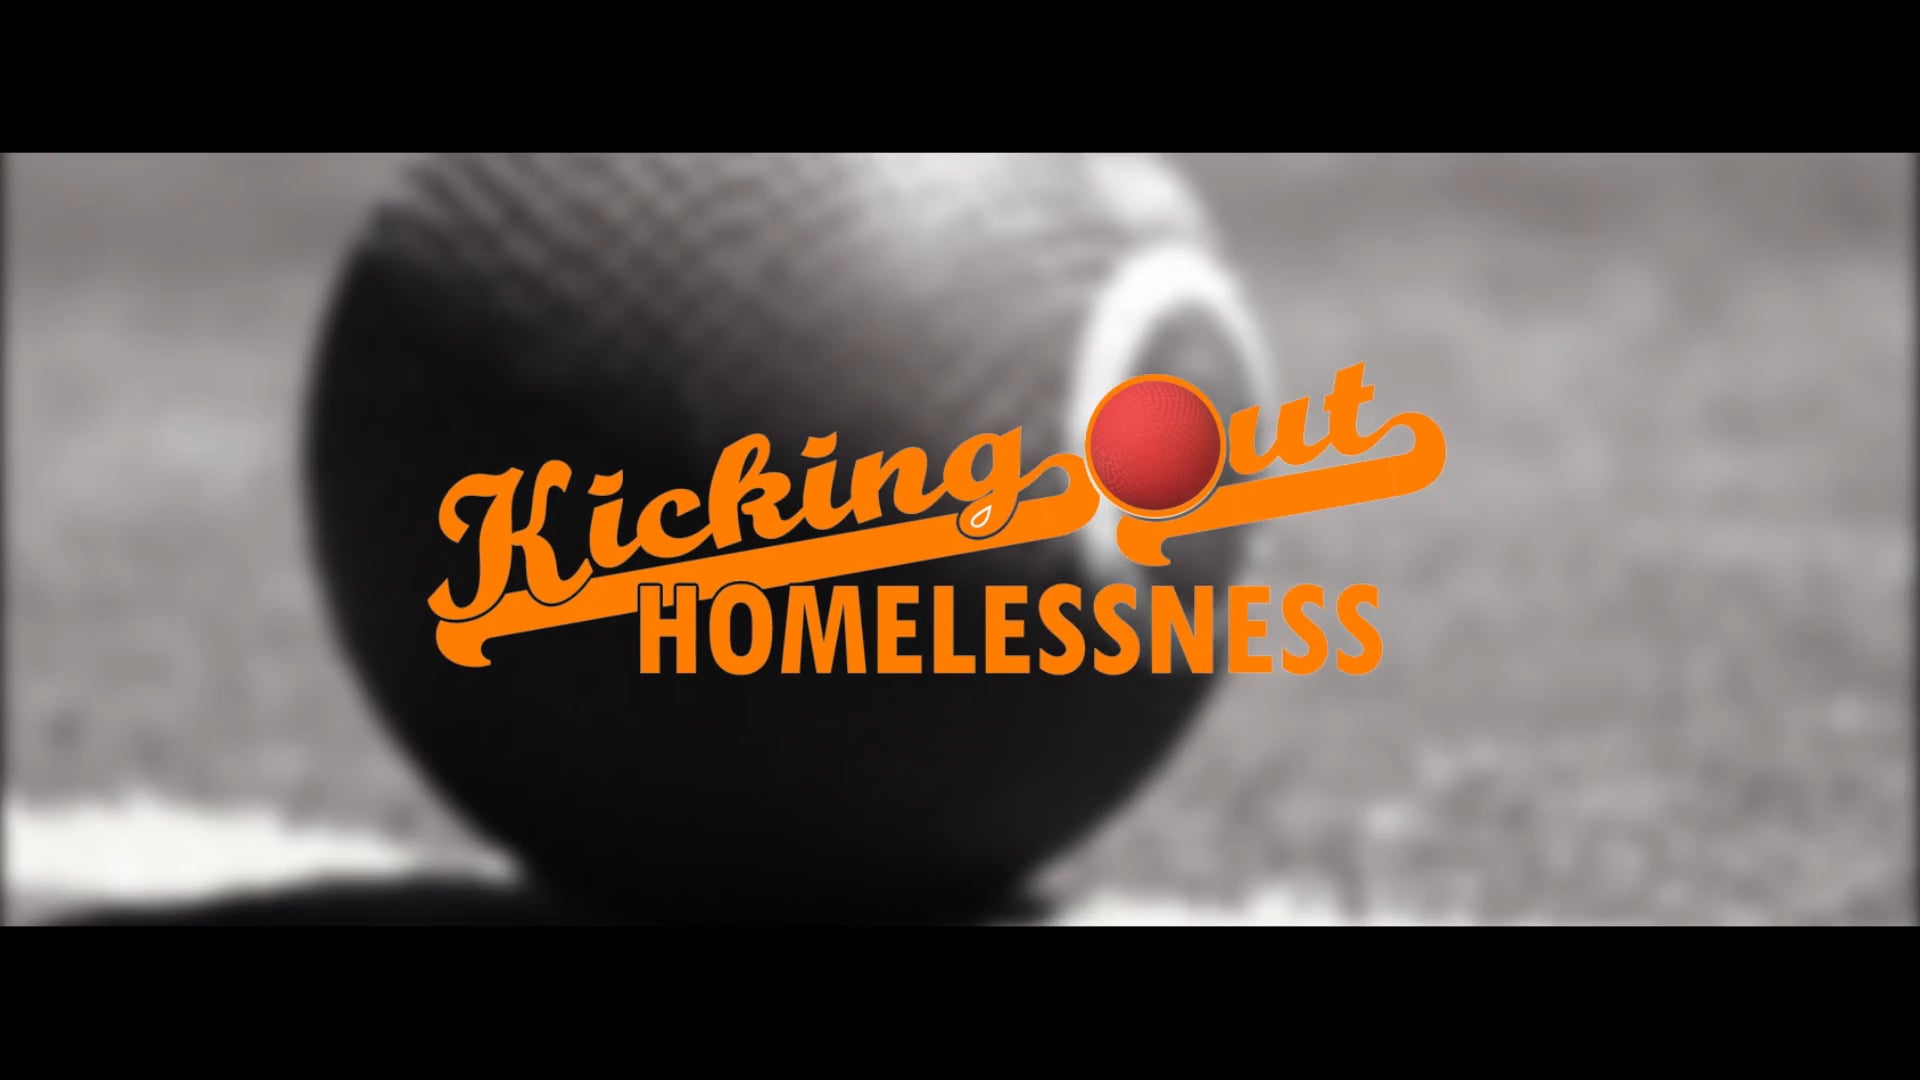 Kicking Out Homelessness